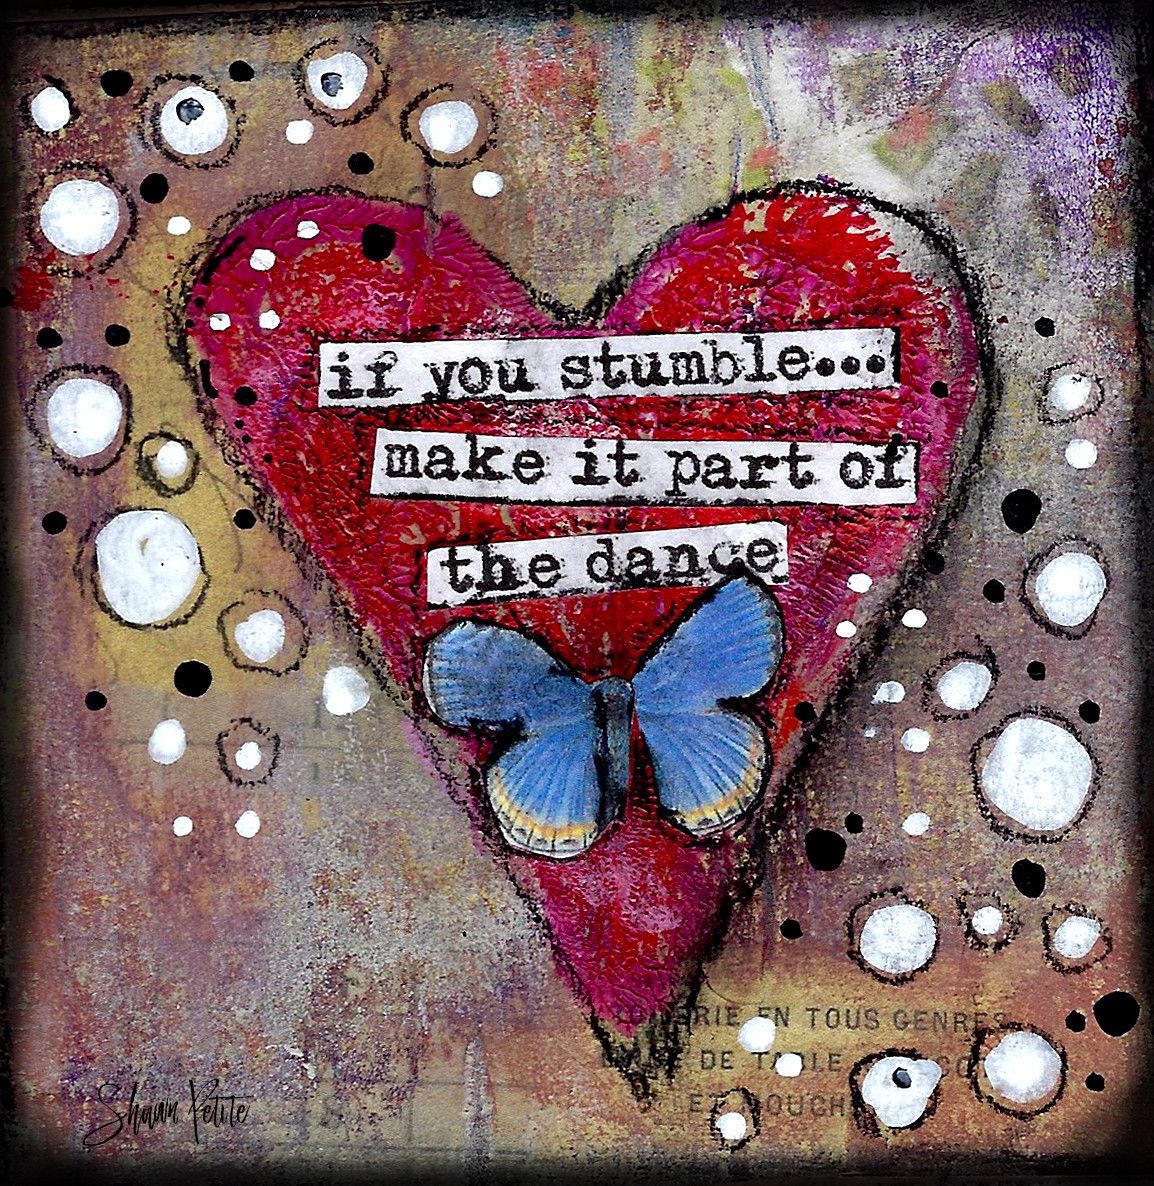 Giving hearts "If you stumble make it part of the Dance" 4x4 print on wood